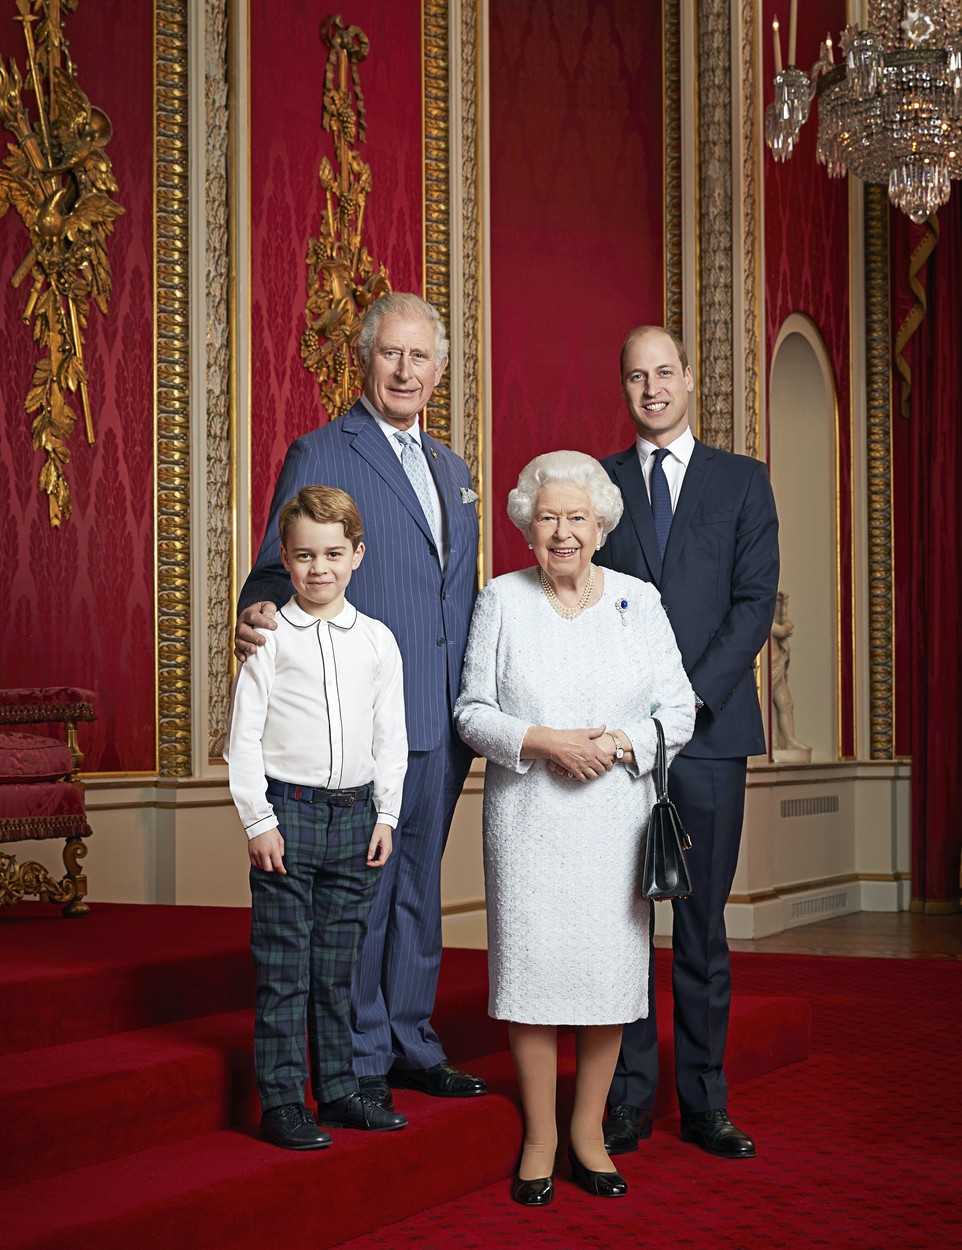 A new portrait of Queen Elizabeth II, The Prince of Wales, The Duke of Cambridge and Prince George to mark the start of a new decade, in the Throne Room at Buckingham Palace, London, UK on the 4th January 2020.

Picture by Ranald Mackechnie/WPA-Pool.

This photograph is solely for news editorial use only; no commercial use whatsoever of the photograph (including any use in merchandising, advertising or any other non-editorial use); not for use after 15th January 2020 without prior permission from Royal Communications. The photograph must not be digitally enhanced, manipulated or modified in any manner or form and must include all of the individuals in the photograph when published.
04 Jan 2020, Image: 490929148, License: Rights-managed, Restrictions: NO United Kingdom, Model Release: no, Credit line: MEGA / Mega Agency / Profimedia